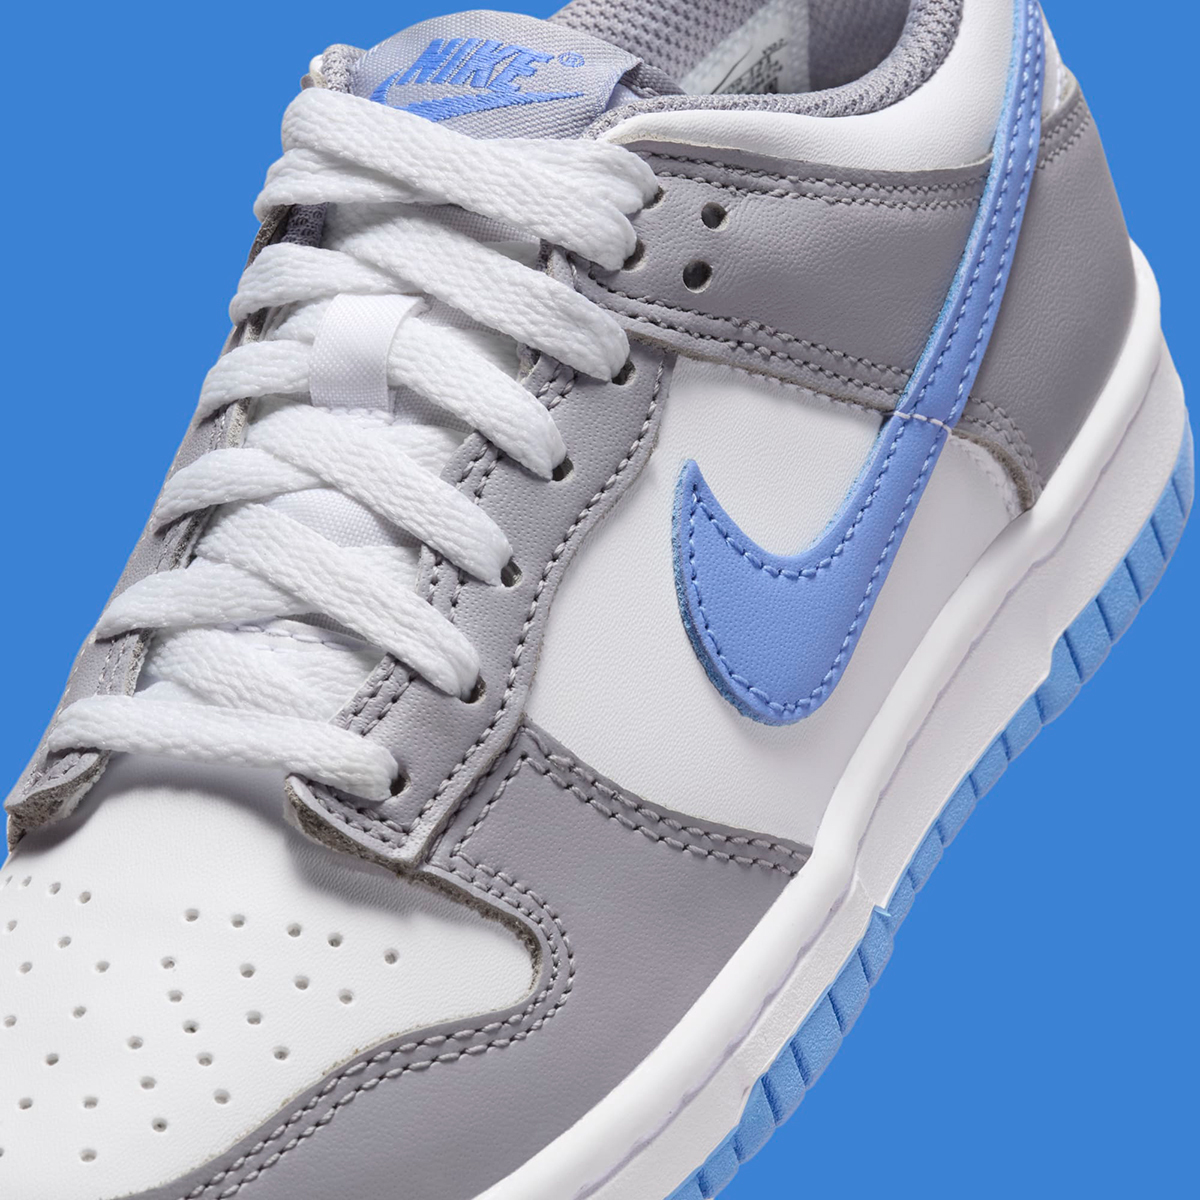 Nike Dunk Low Summit White Cement Grey Royal Pulse Fb9109 121 8